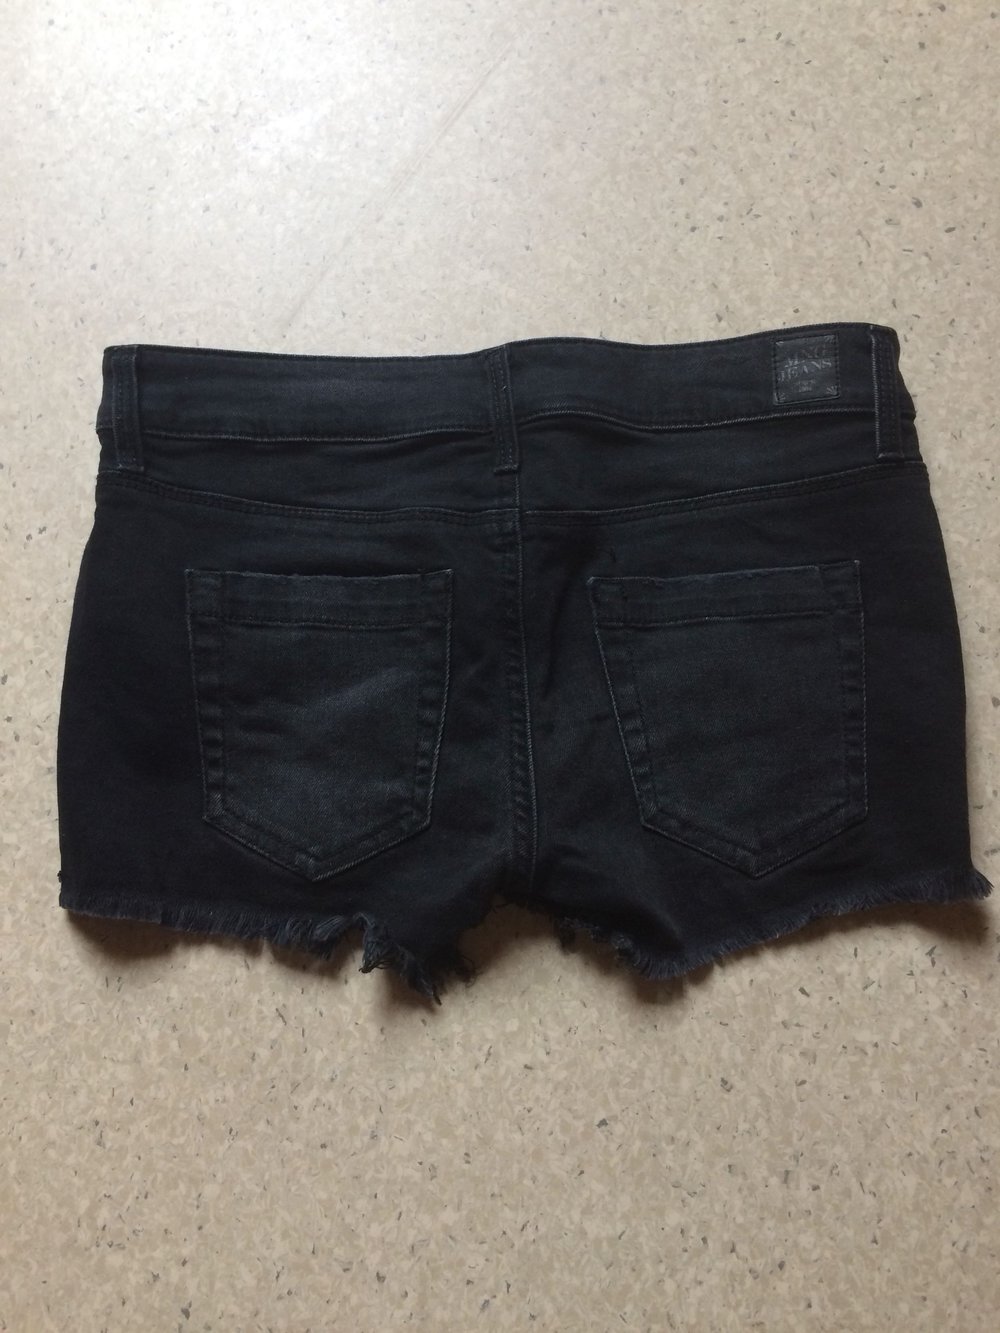 Jeans Shorts Hotpants H&M Destroyed Used look